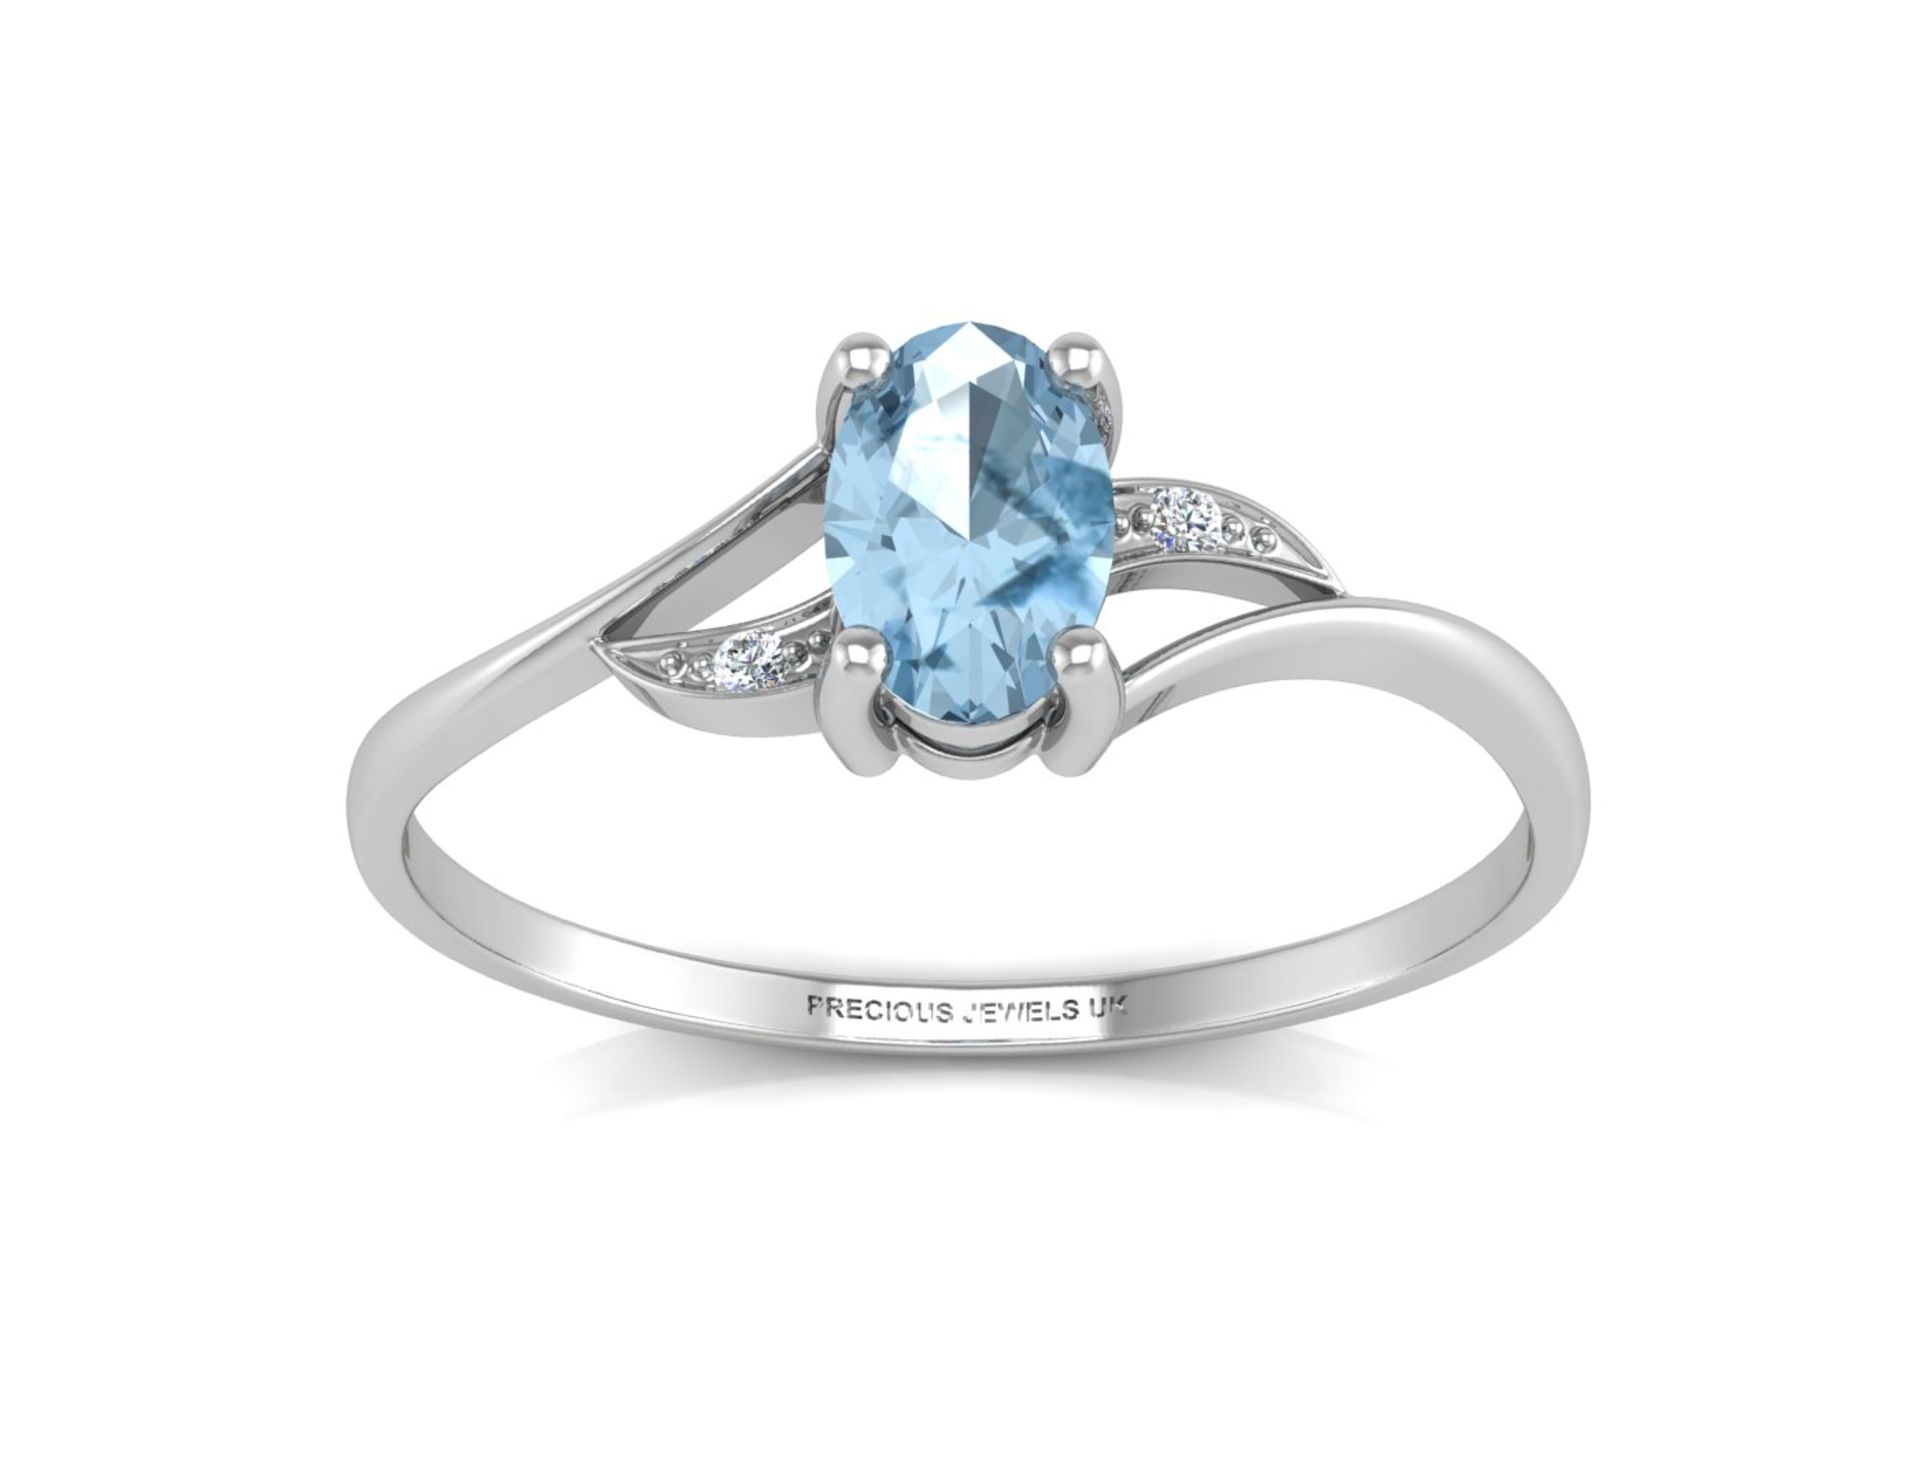 9ct White Gold Diamond And Blue Topaz Ring 0.01 Carats - Valued by AGI £625.00 - 9ct White Gold - Image 3 of 4